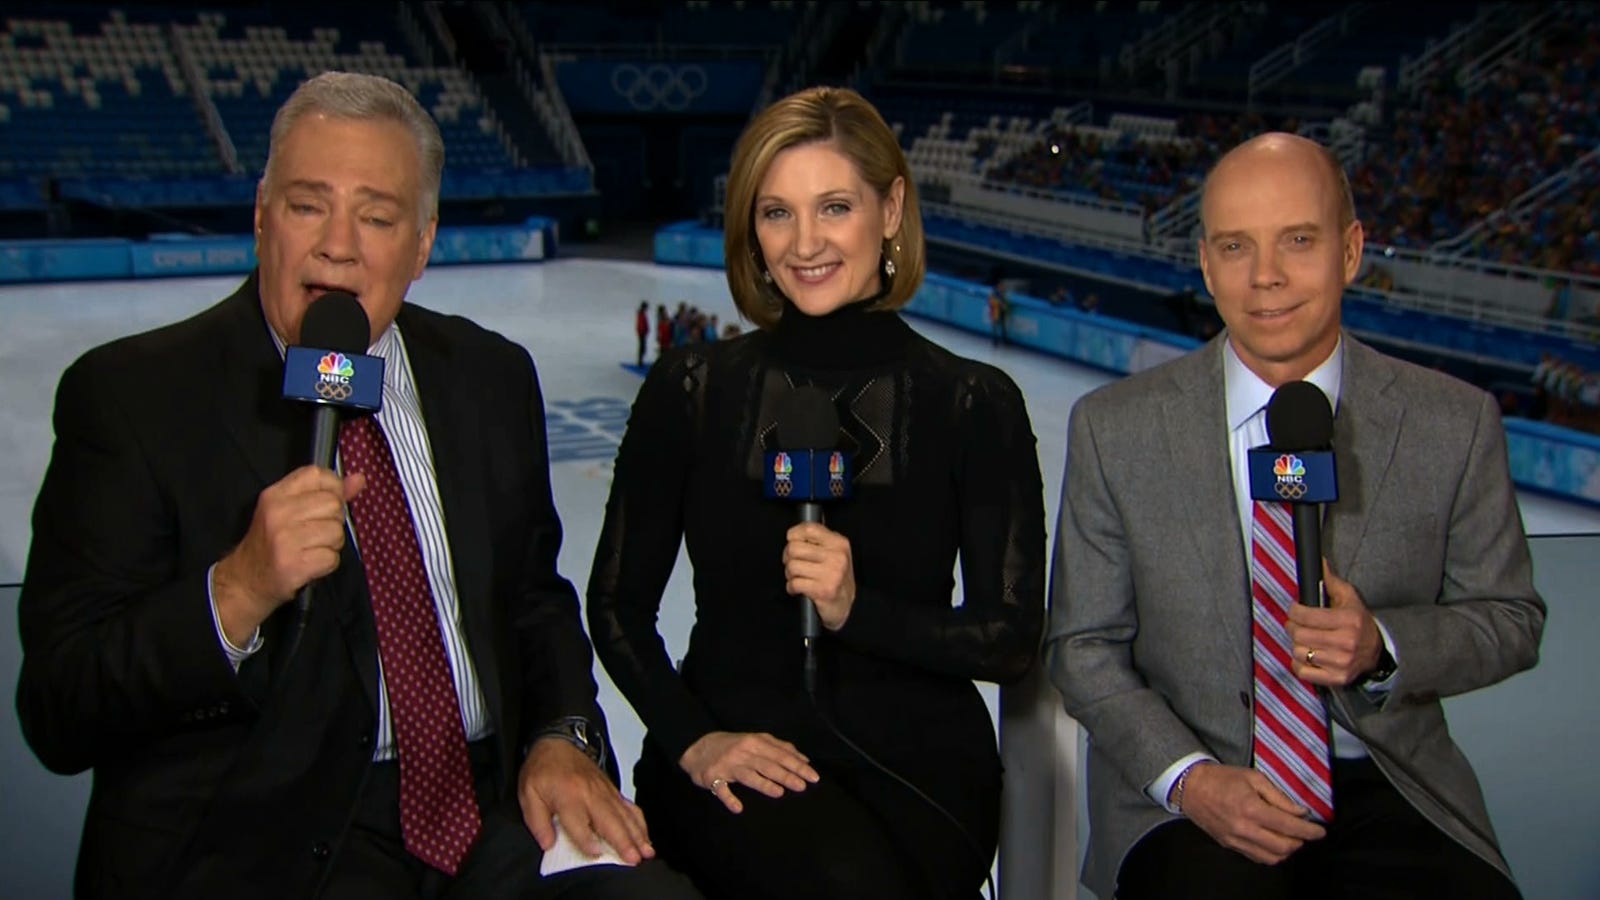 Why Does NBC's Primetime Figure Skating Broadcast Suck?